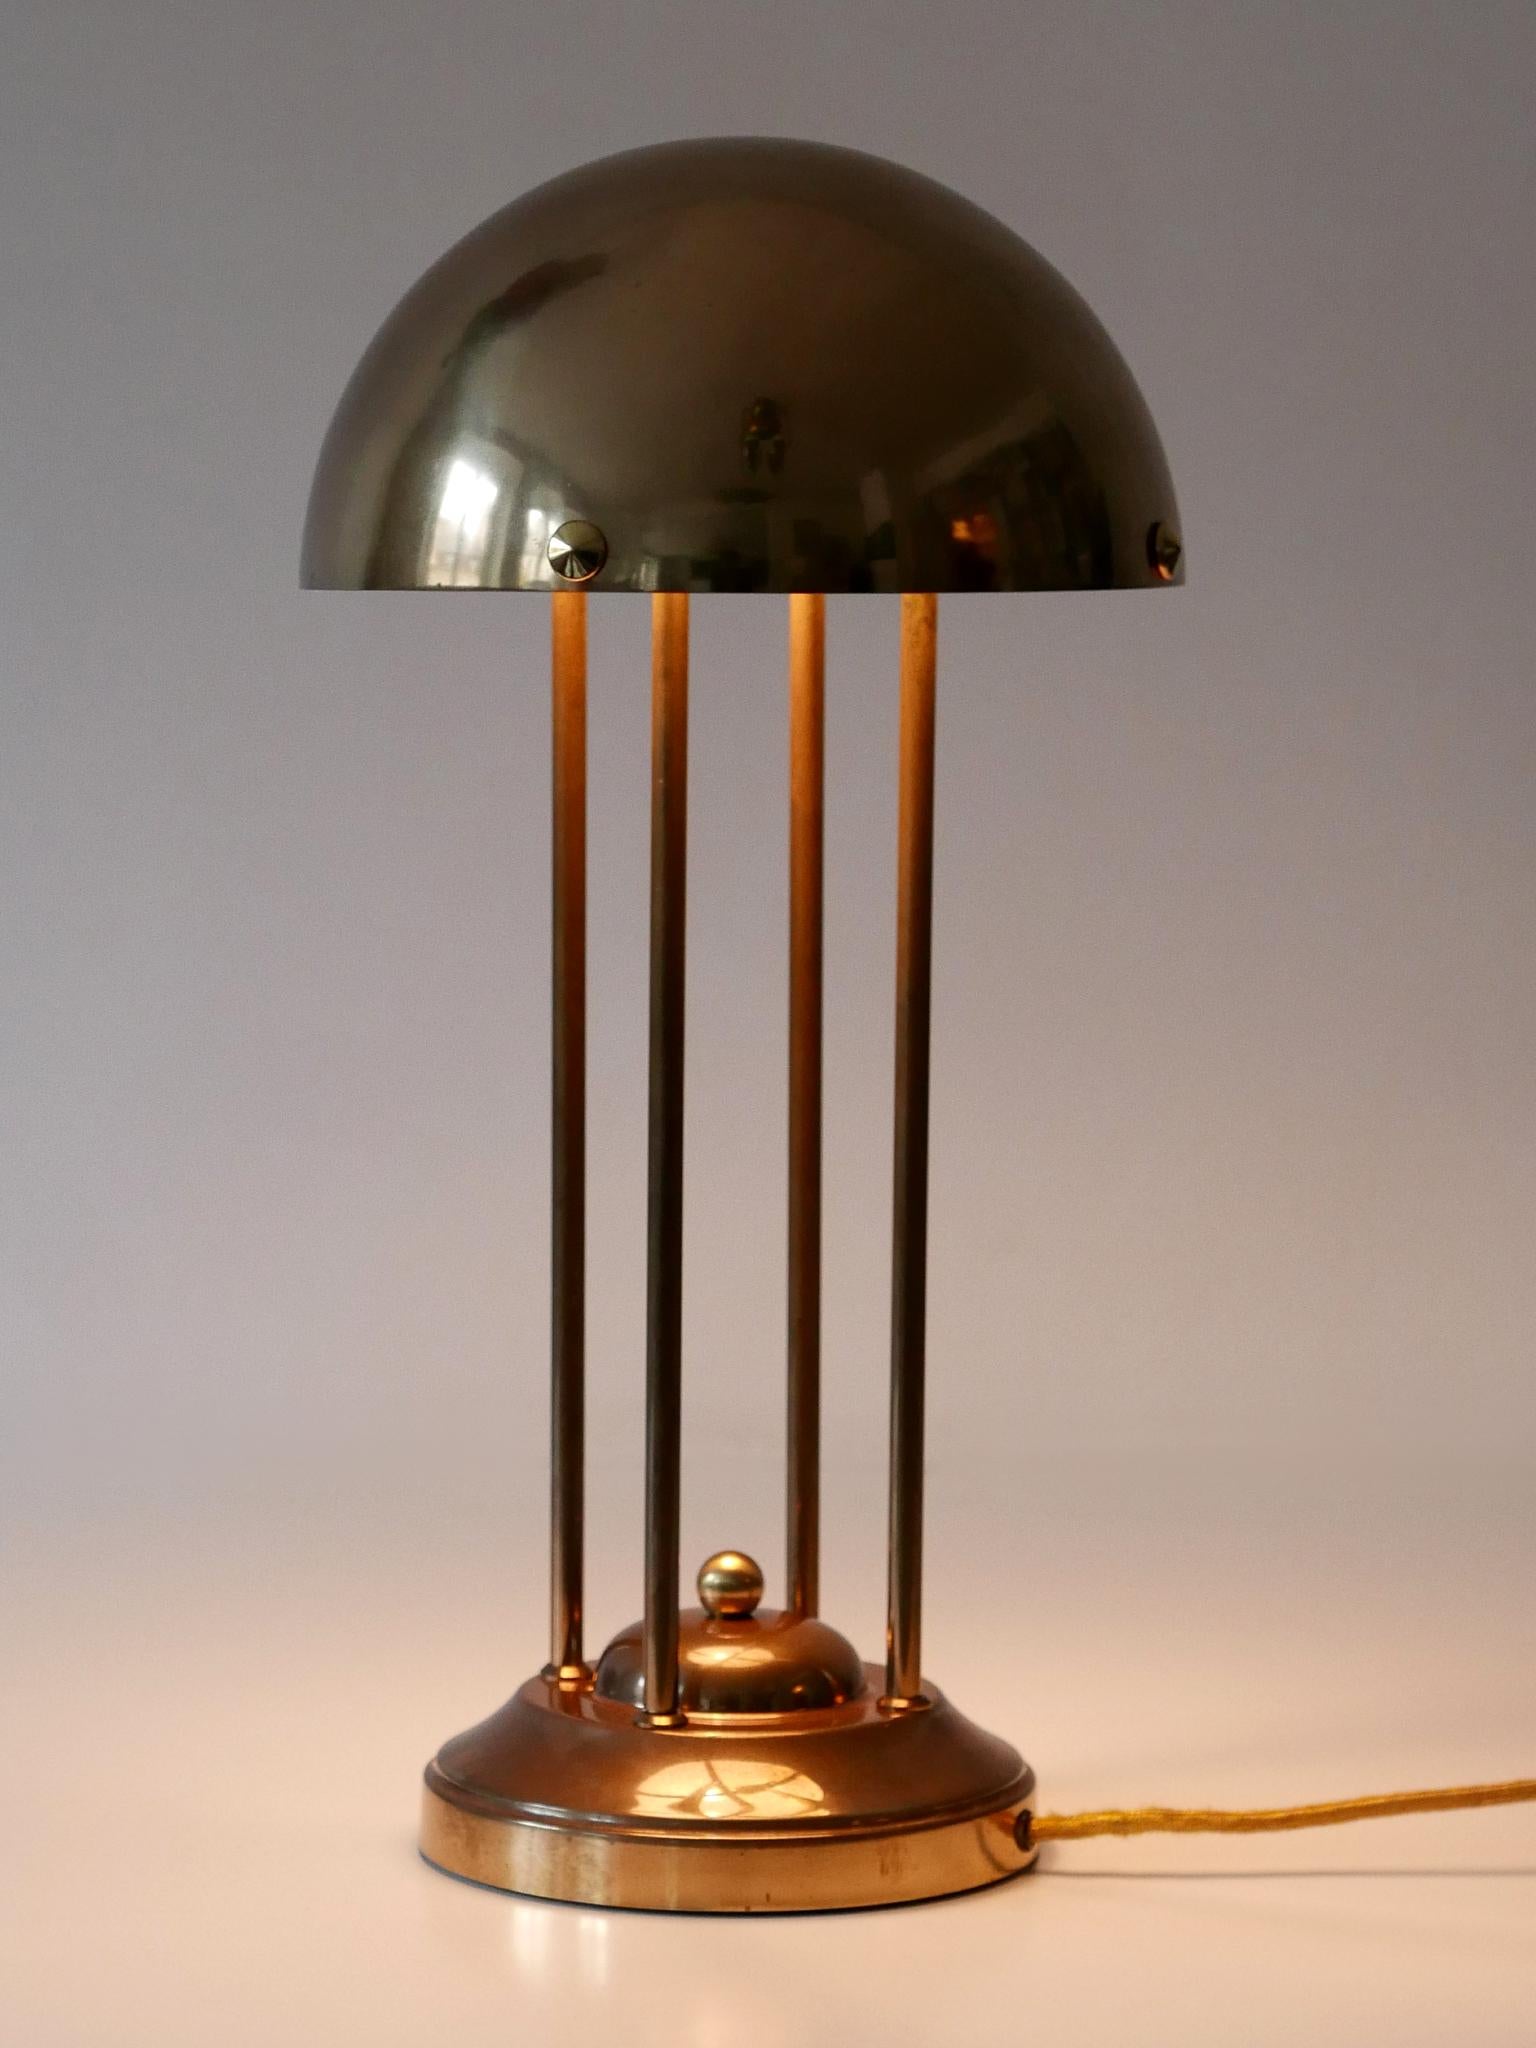 Monumental Art Nouveau table lamp Haus Henneberg HH1. Designed by Josef Hoffmann, 1902, Vienna, Austria. This is probably a later production from 1960s.

This sculptural table lamp is executed in bras. It comes with an E27 / E26 Edison screw fit